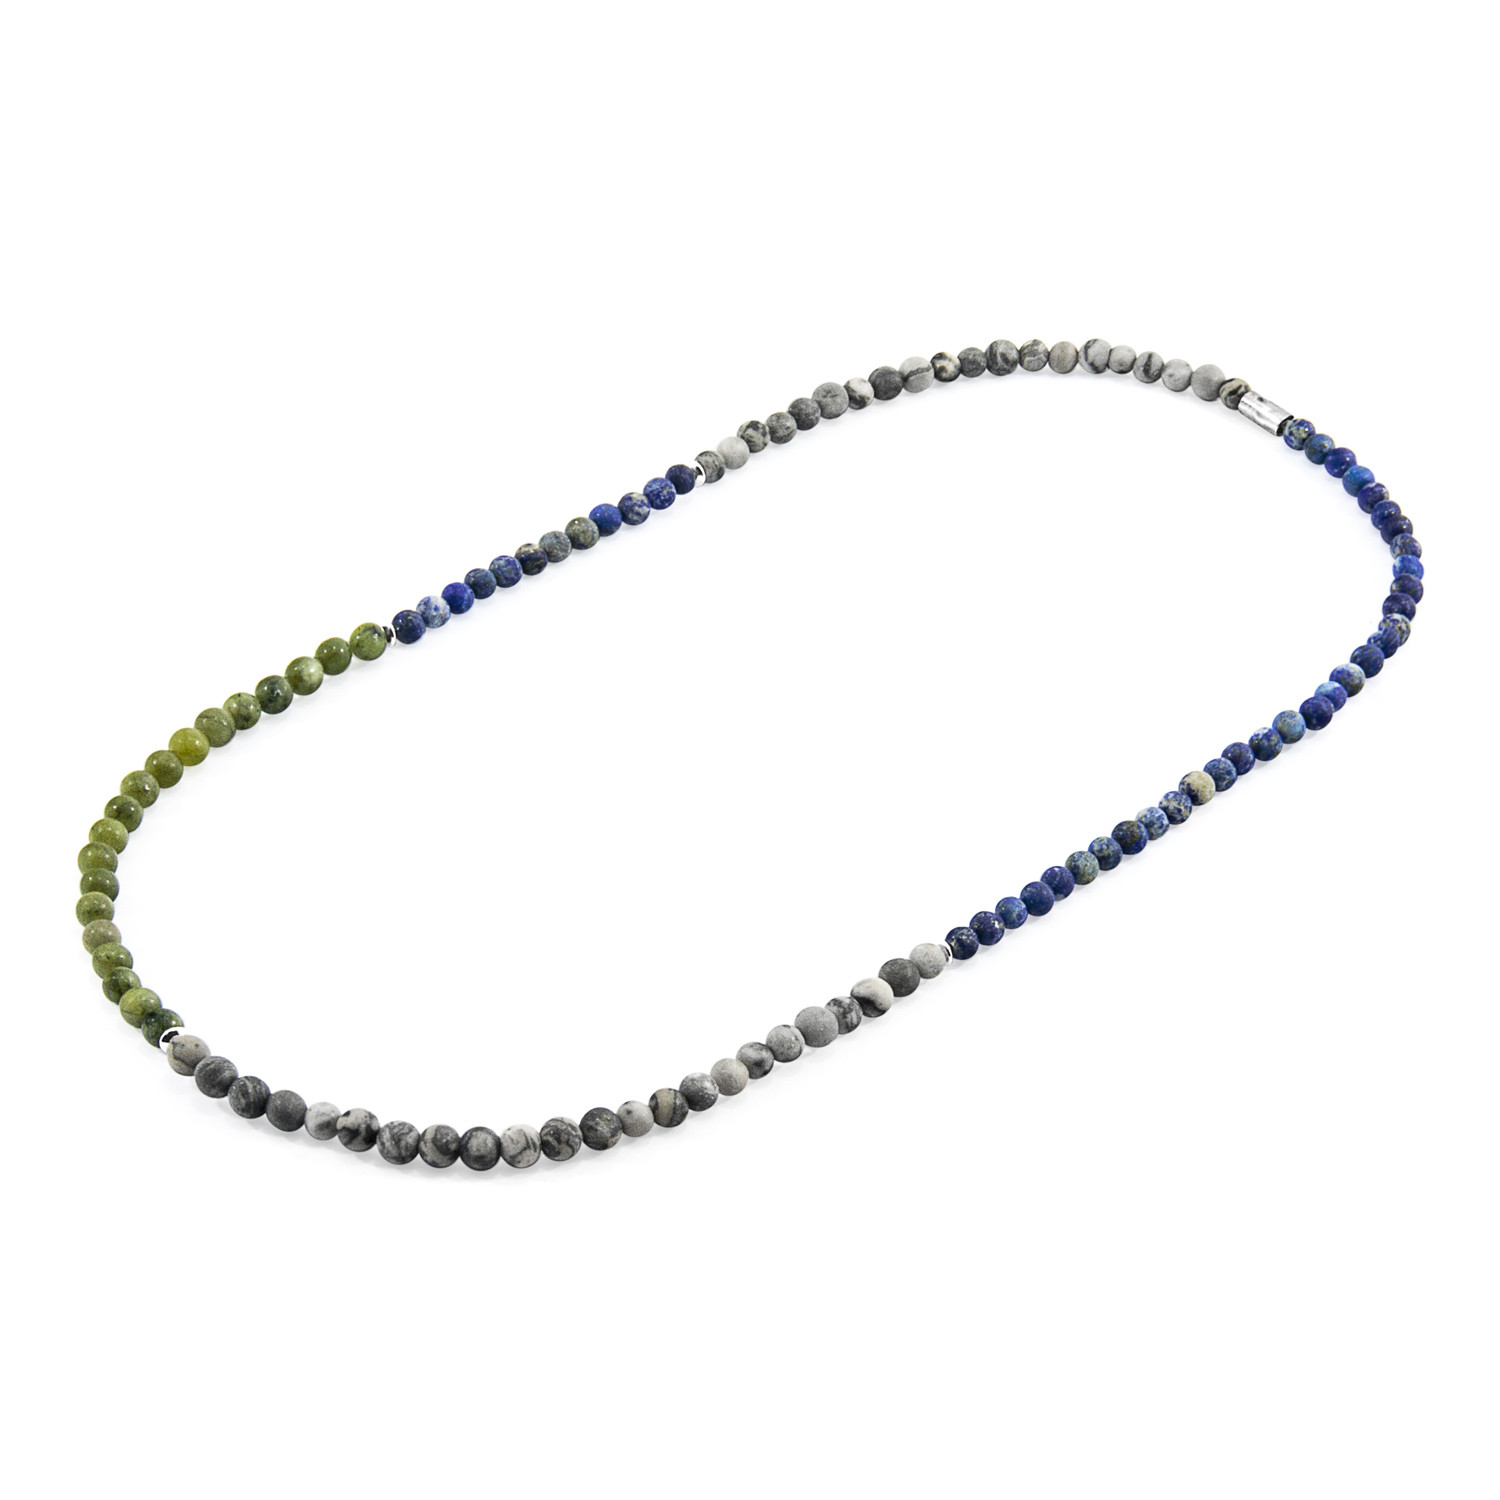 Anchor & Crew Grey Jasper, Green Jade and Blue Sodalite Isaac Silver and Stone SKINNY Necklace x Wrap Bracelet